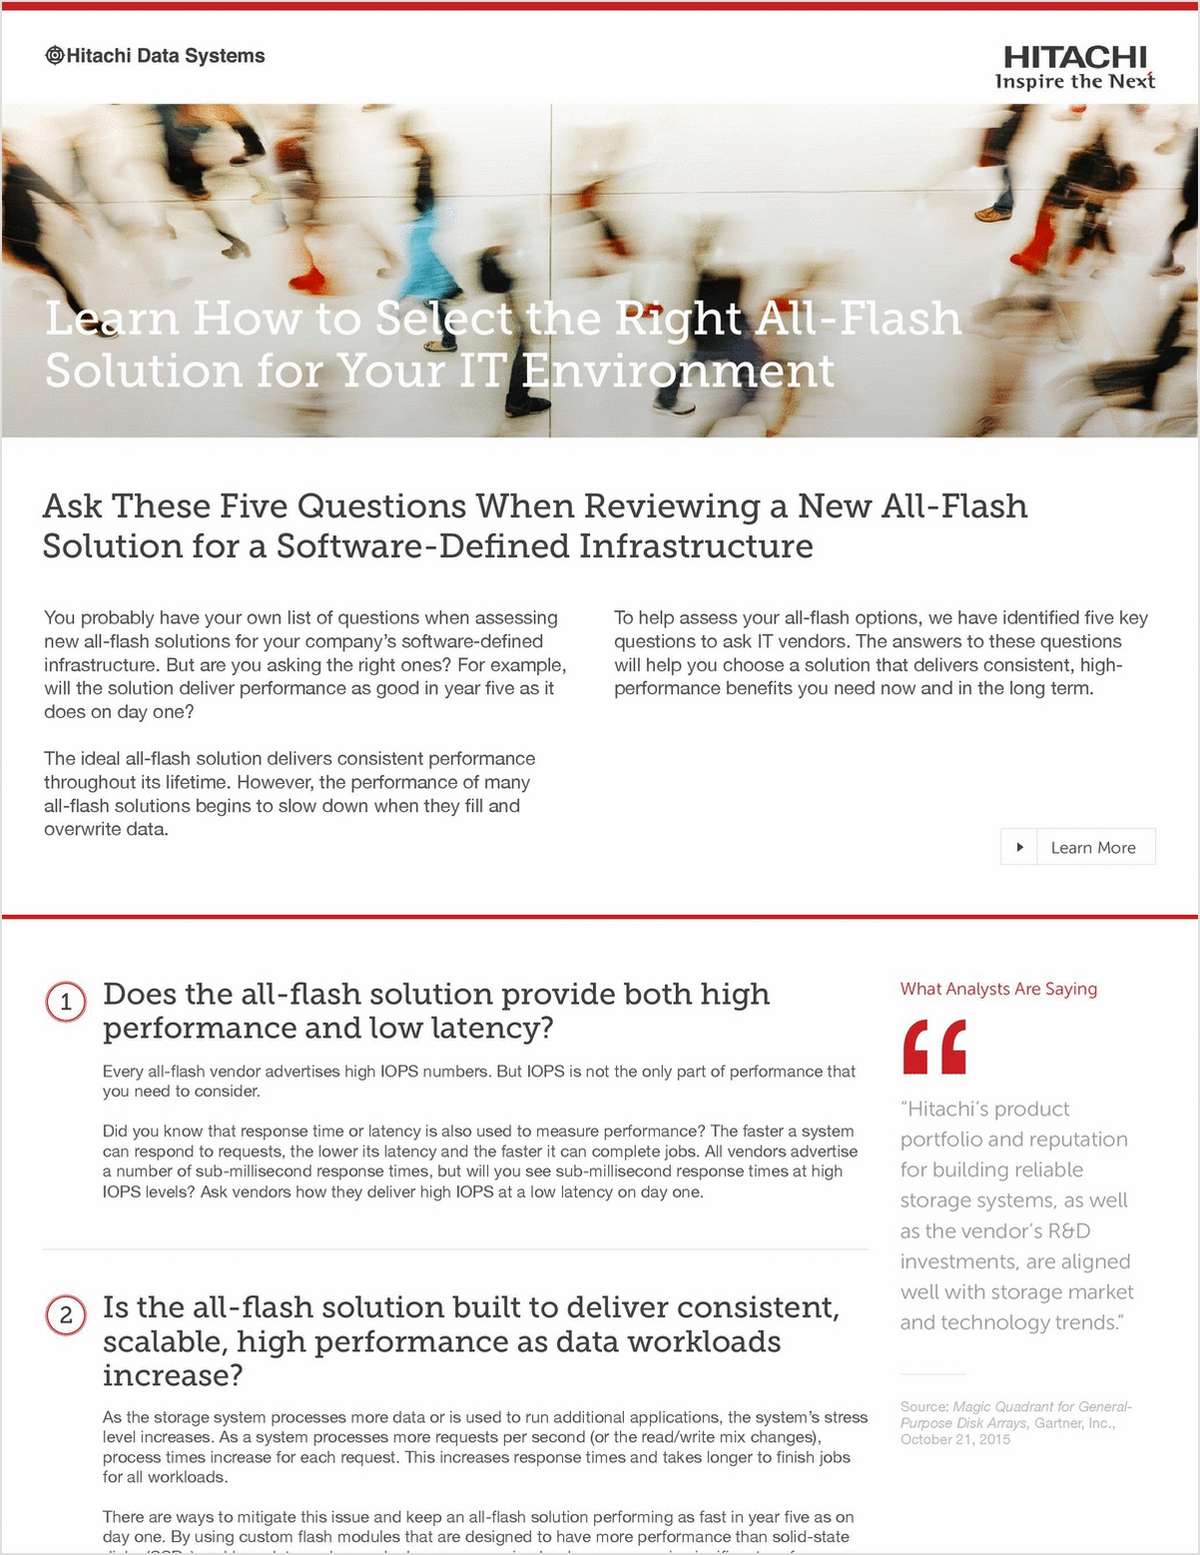 Learn How to Select the Right All-Flash Solution for Your IT Environment